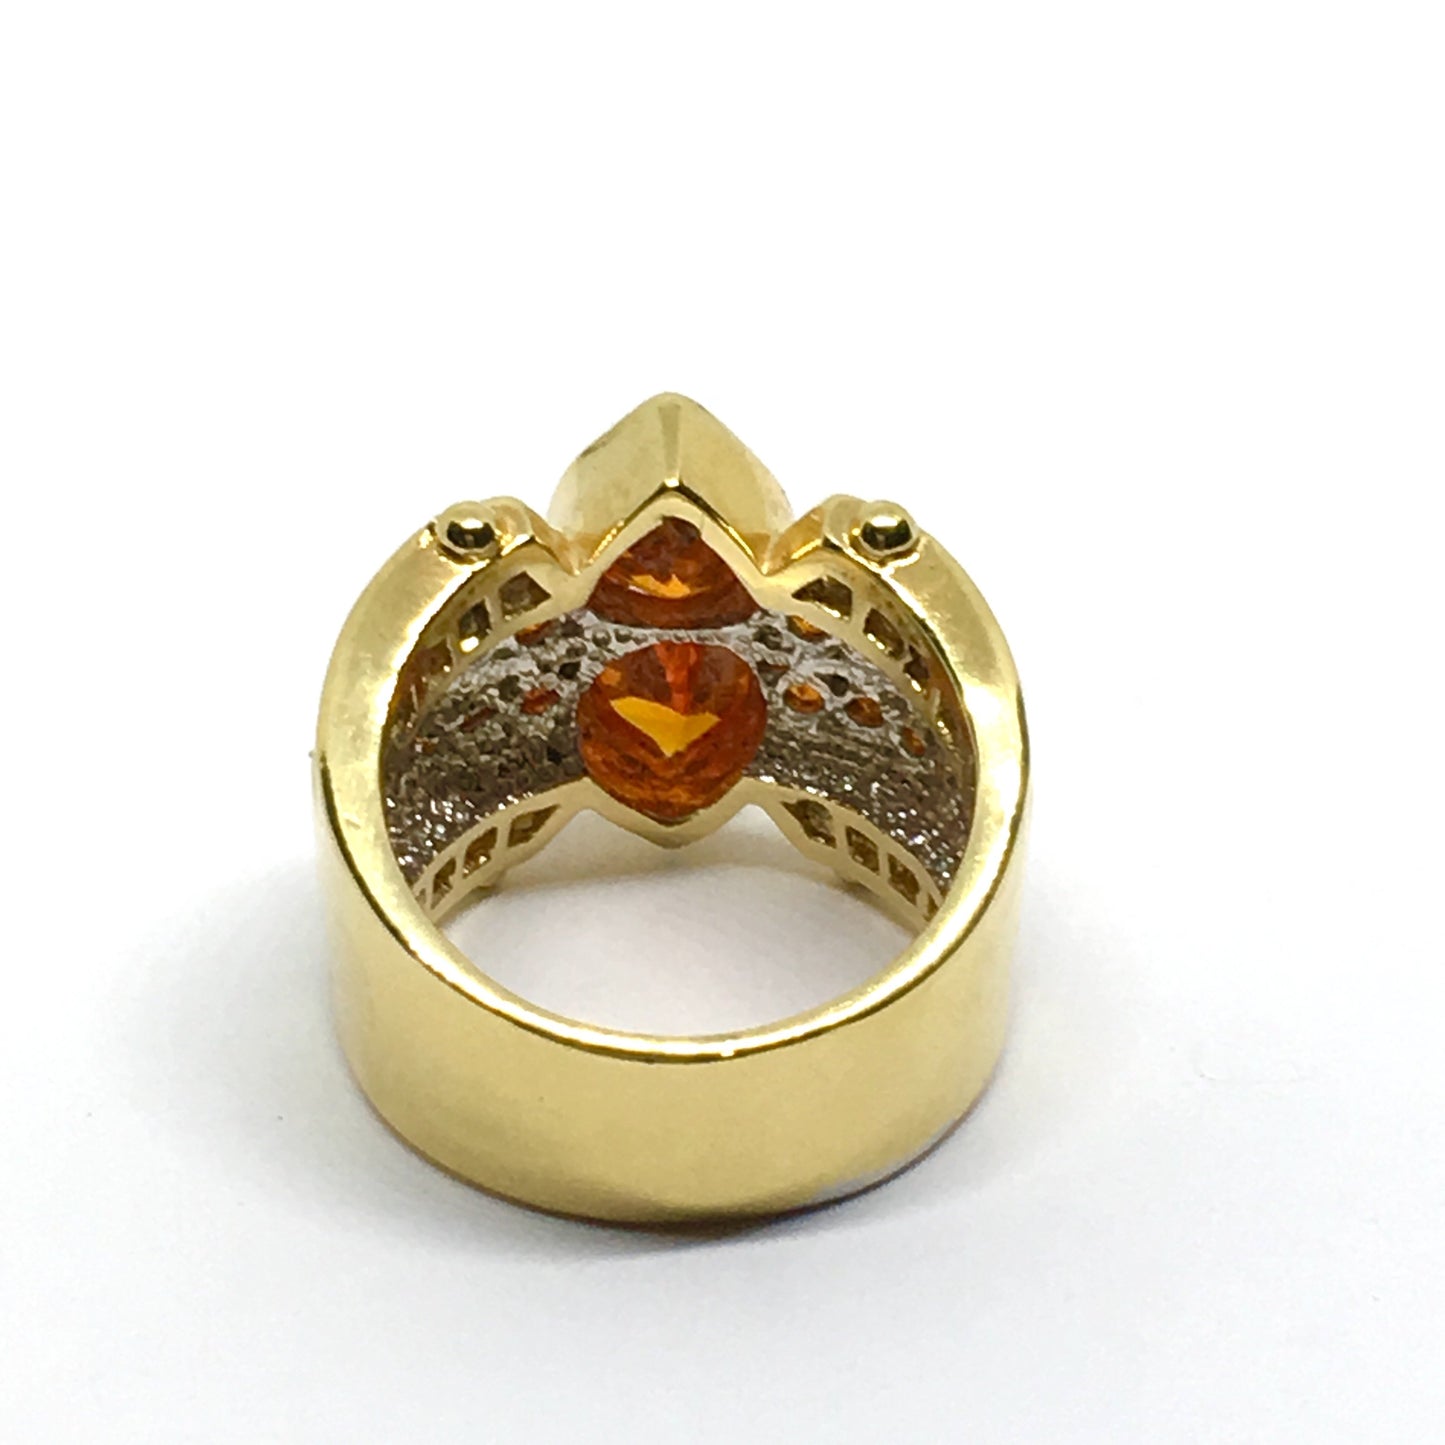 Ring - Womens Gold Ring - Quality Sterling Silver Cocktail Ring - Wide Band - Jaw Dropping Sapphire Orange Cz Statement Ring